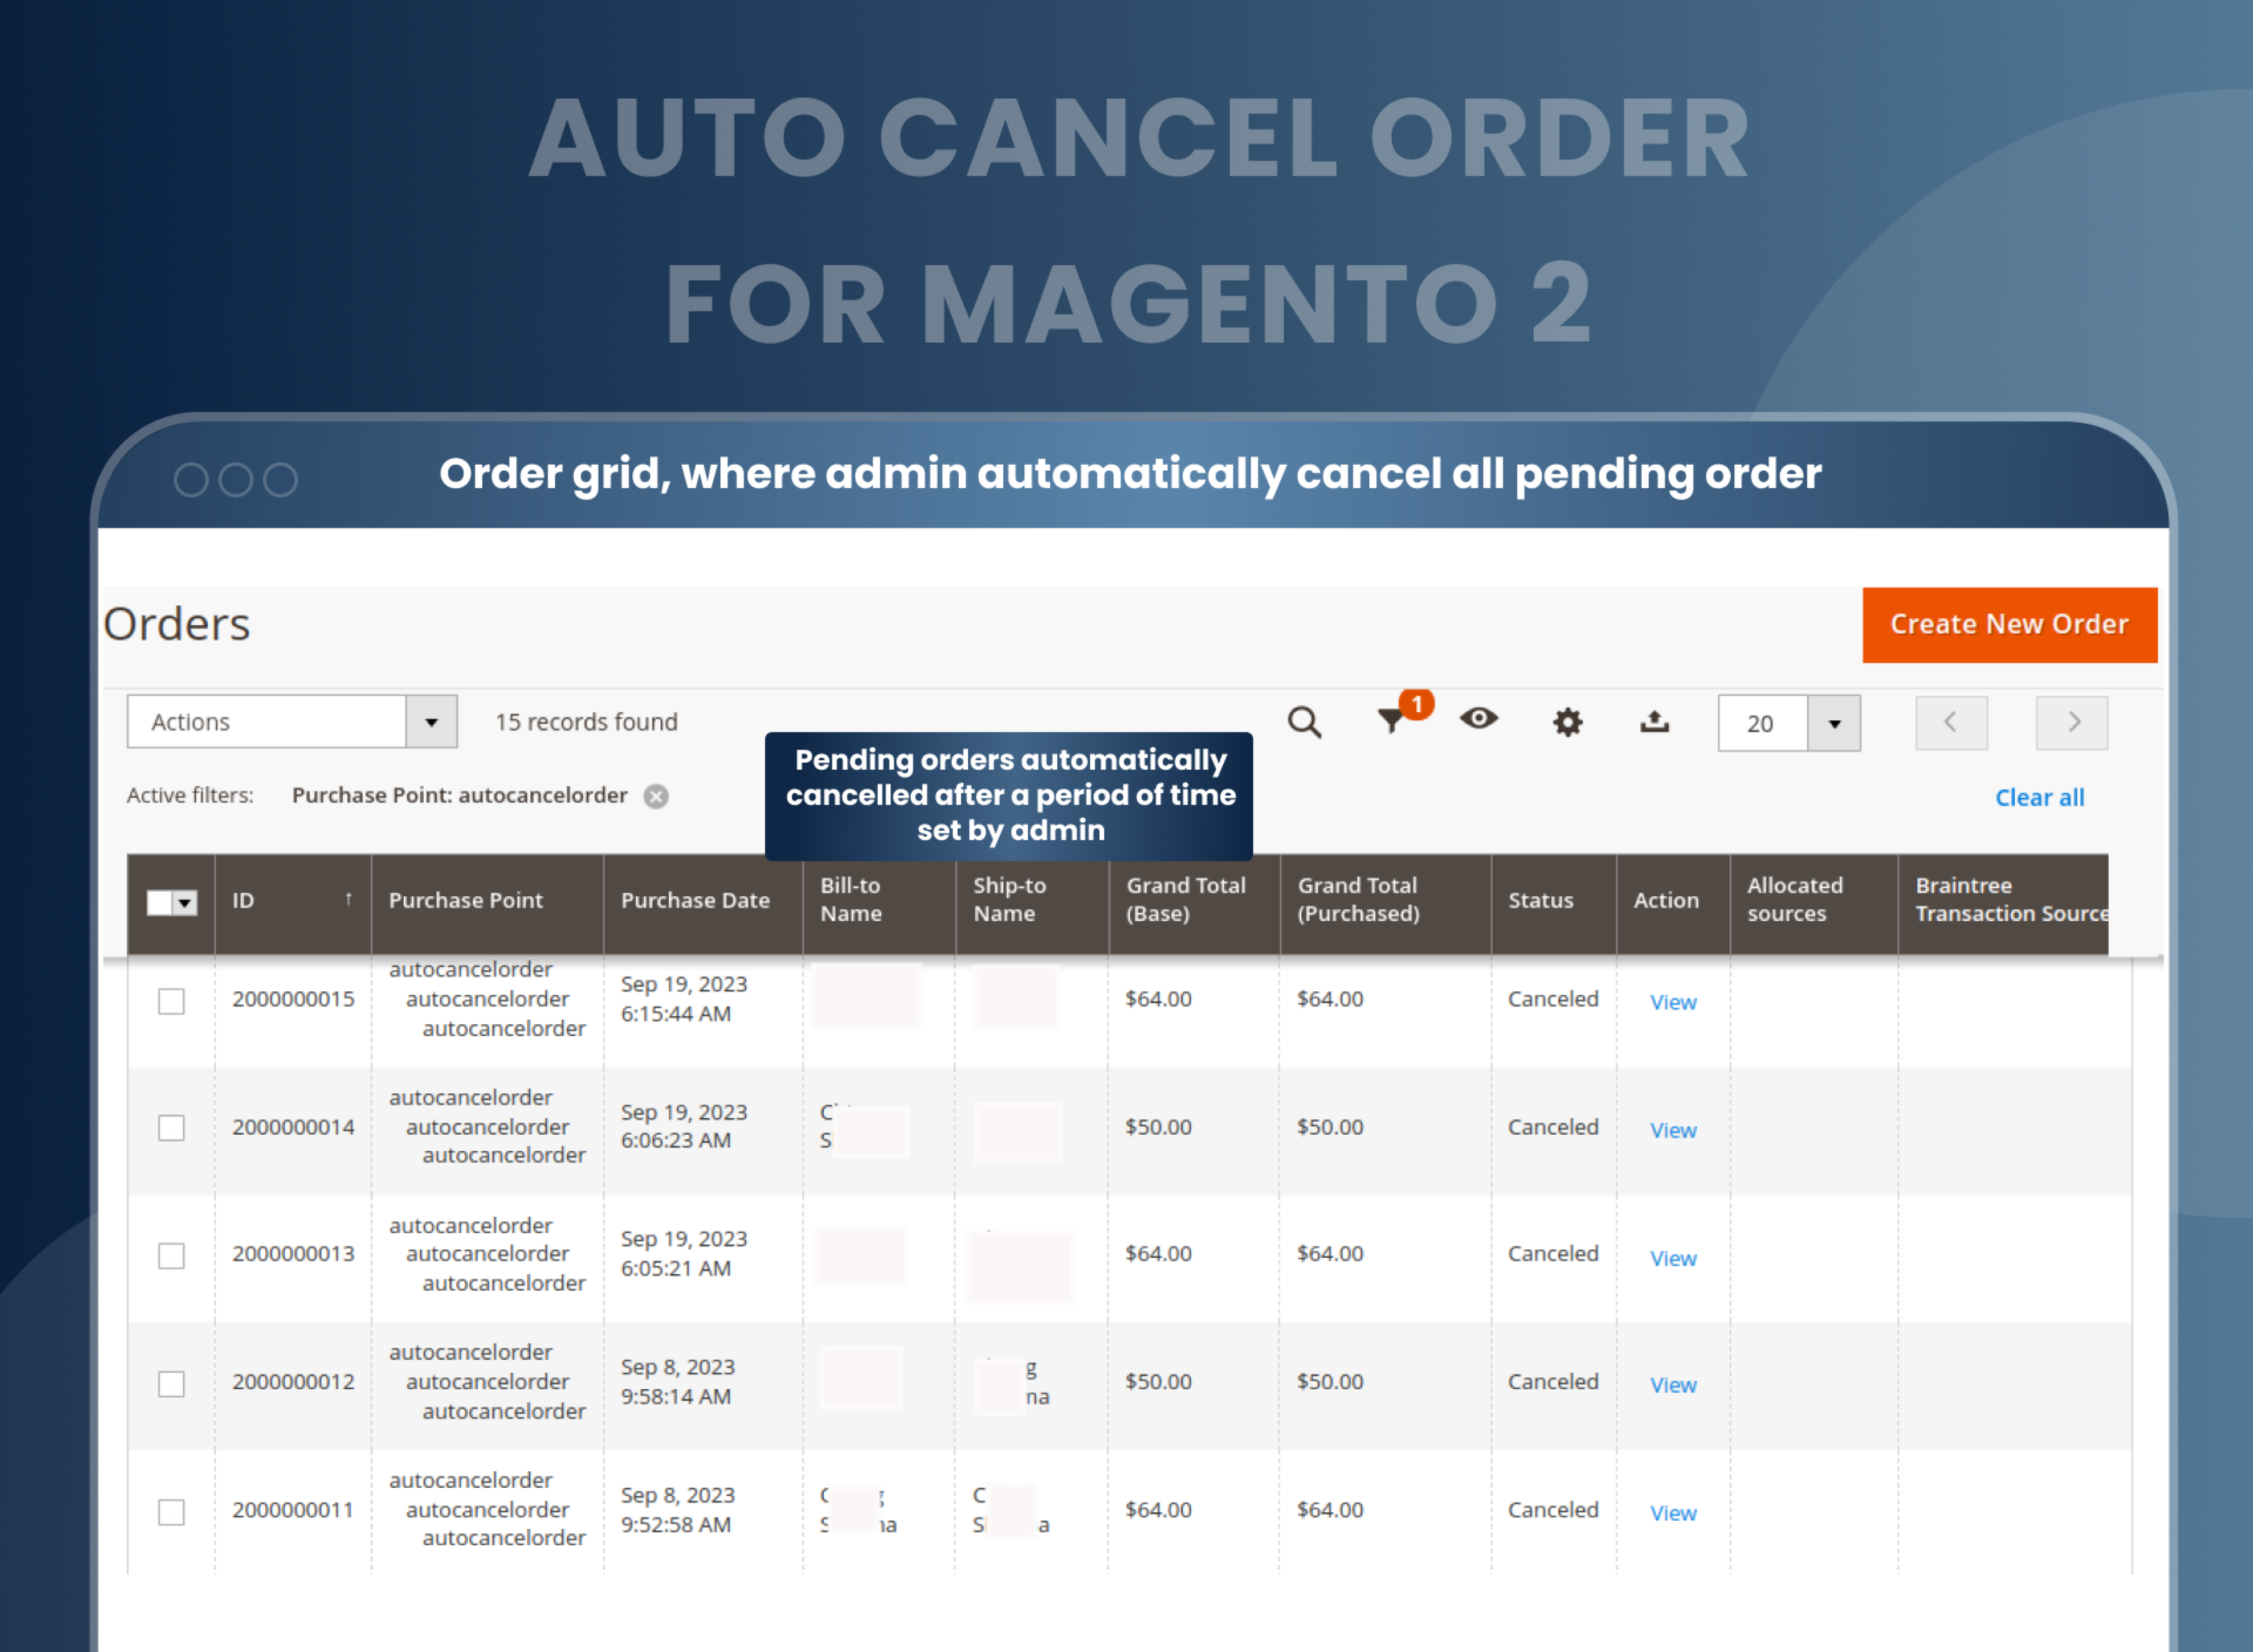 Order grid, where admin automatically cancel all pending order